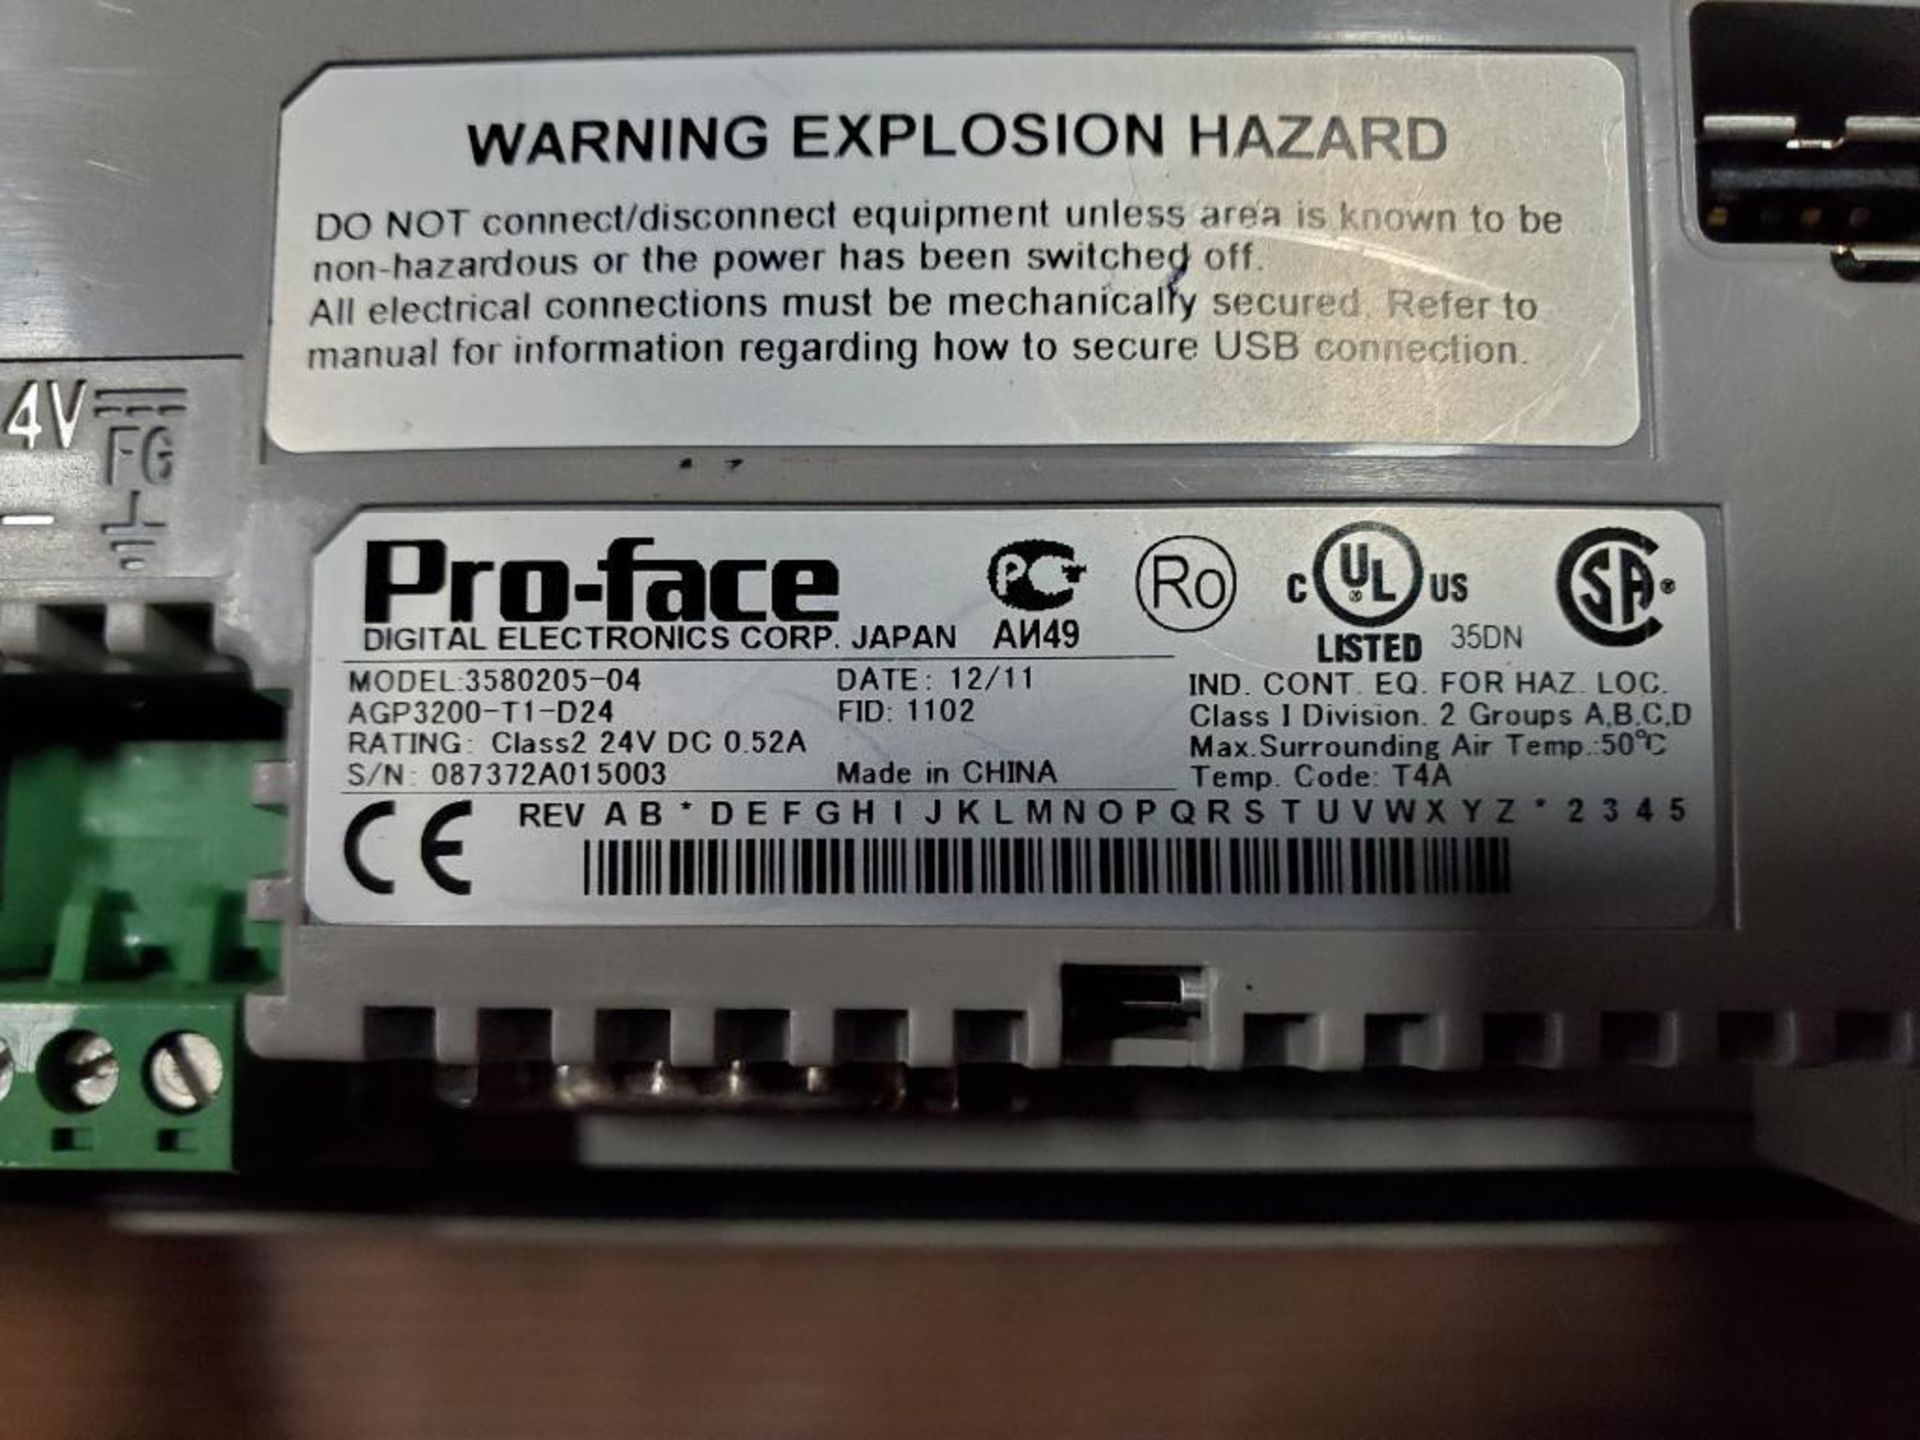 ProFace human machine interface. Model number 3580205-04. Part number AGP3200-T1-D24. - Image 5 of 5